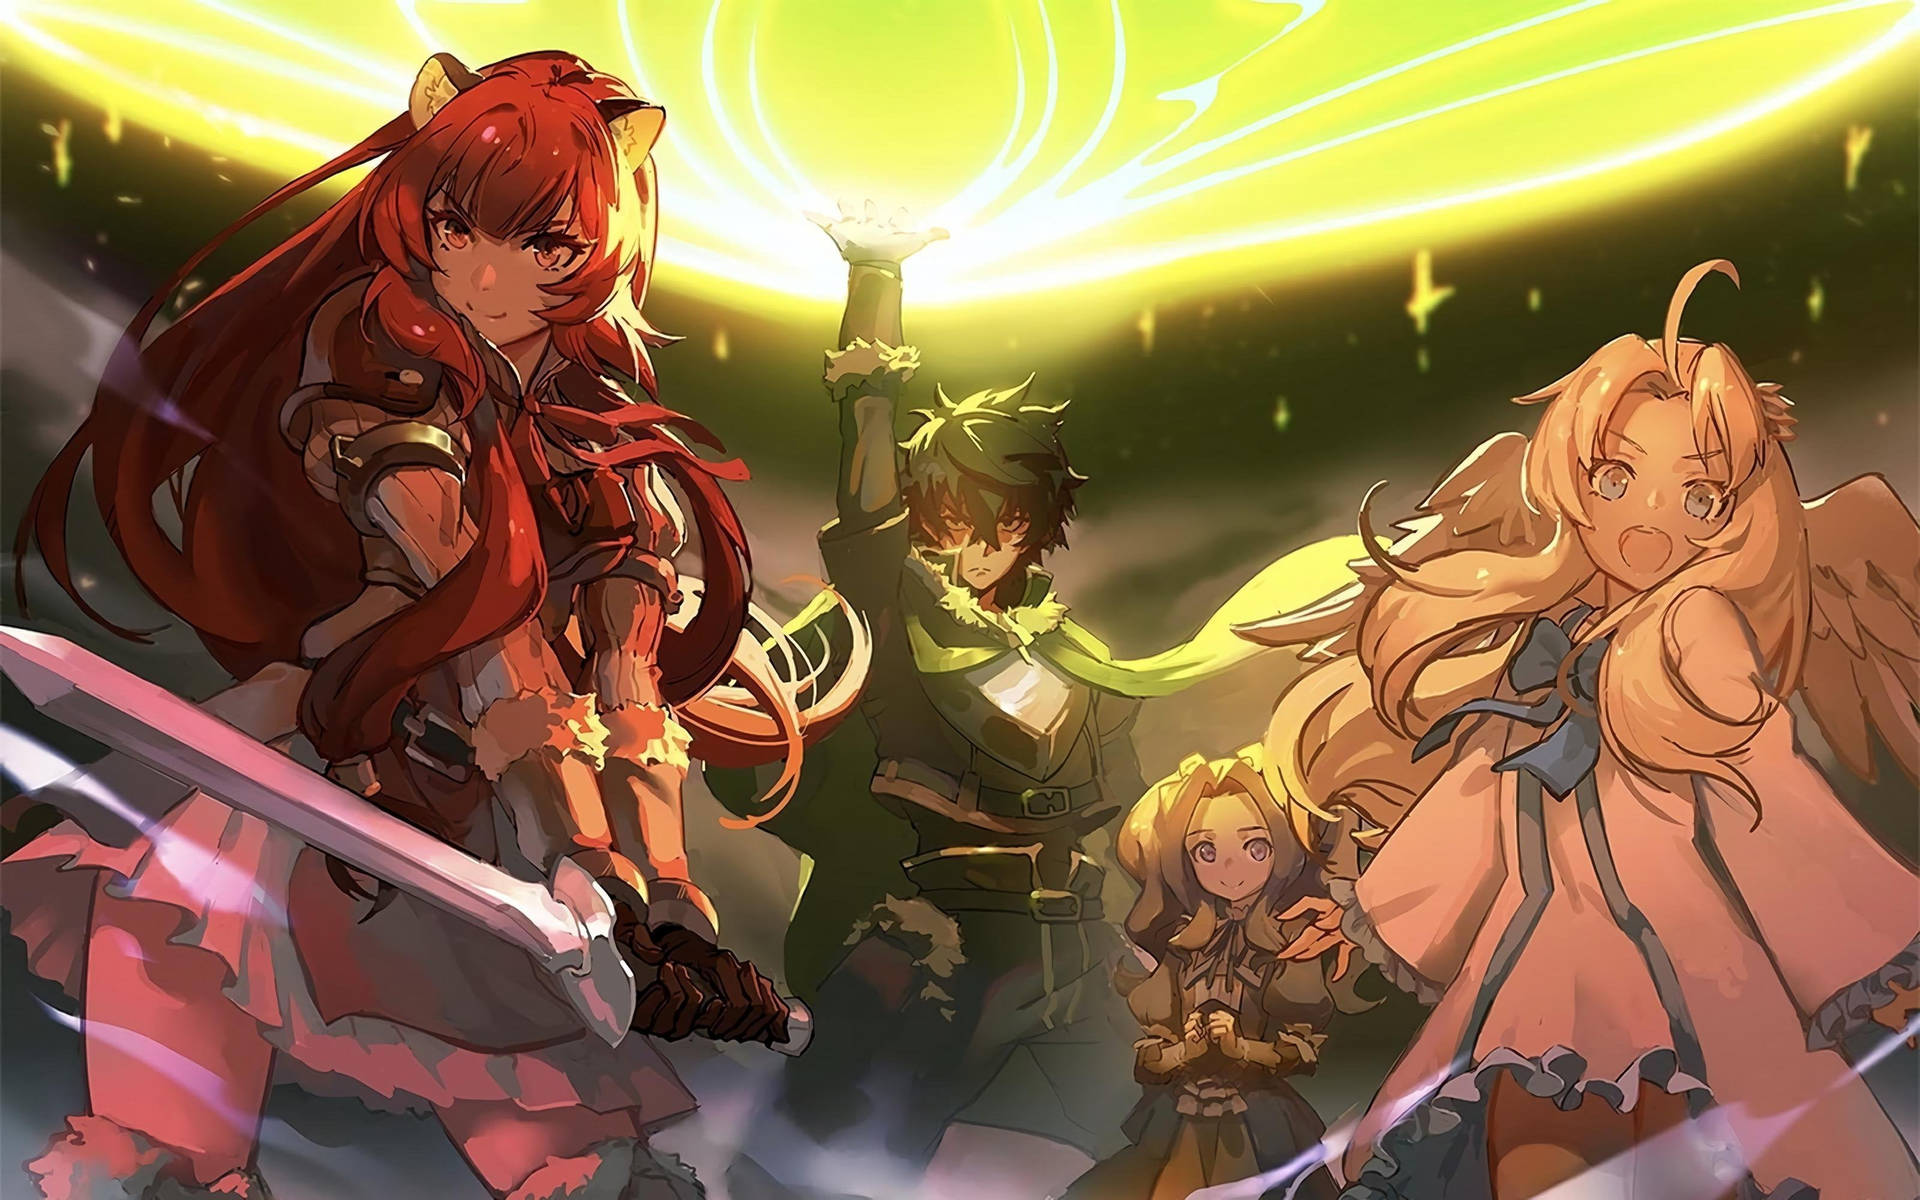 A Group Of Anime Characters With Swords And A Green Light